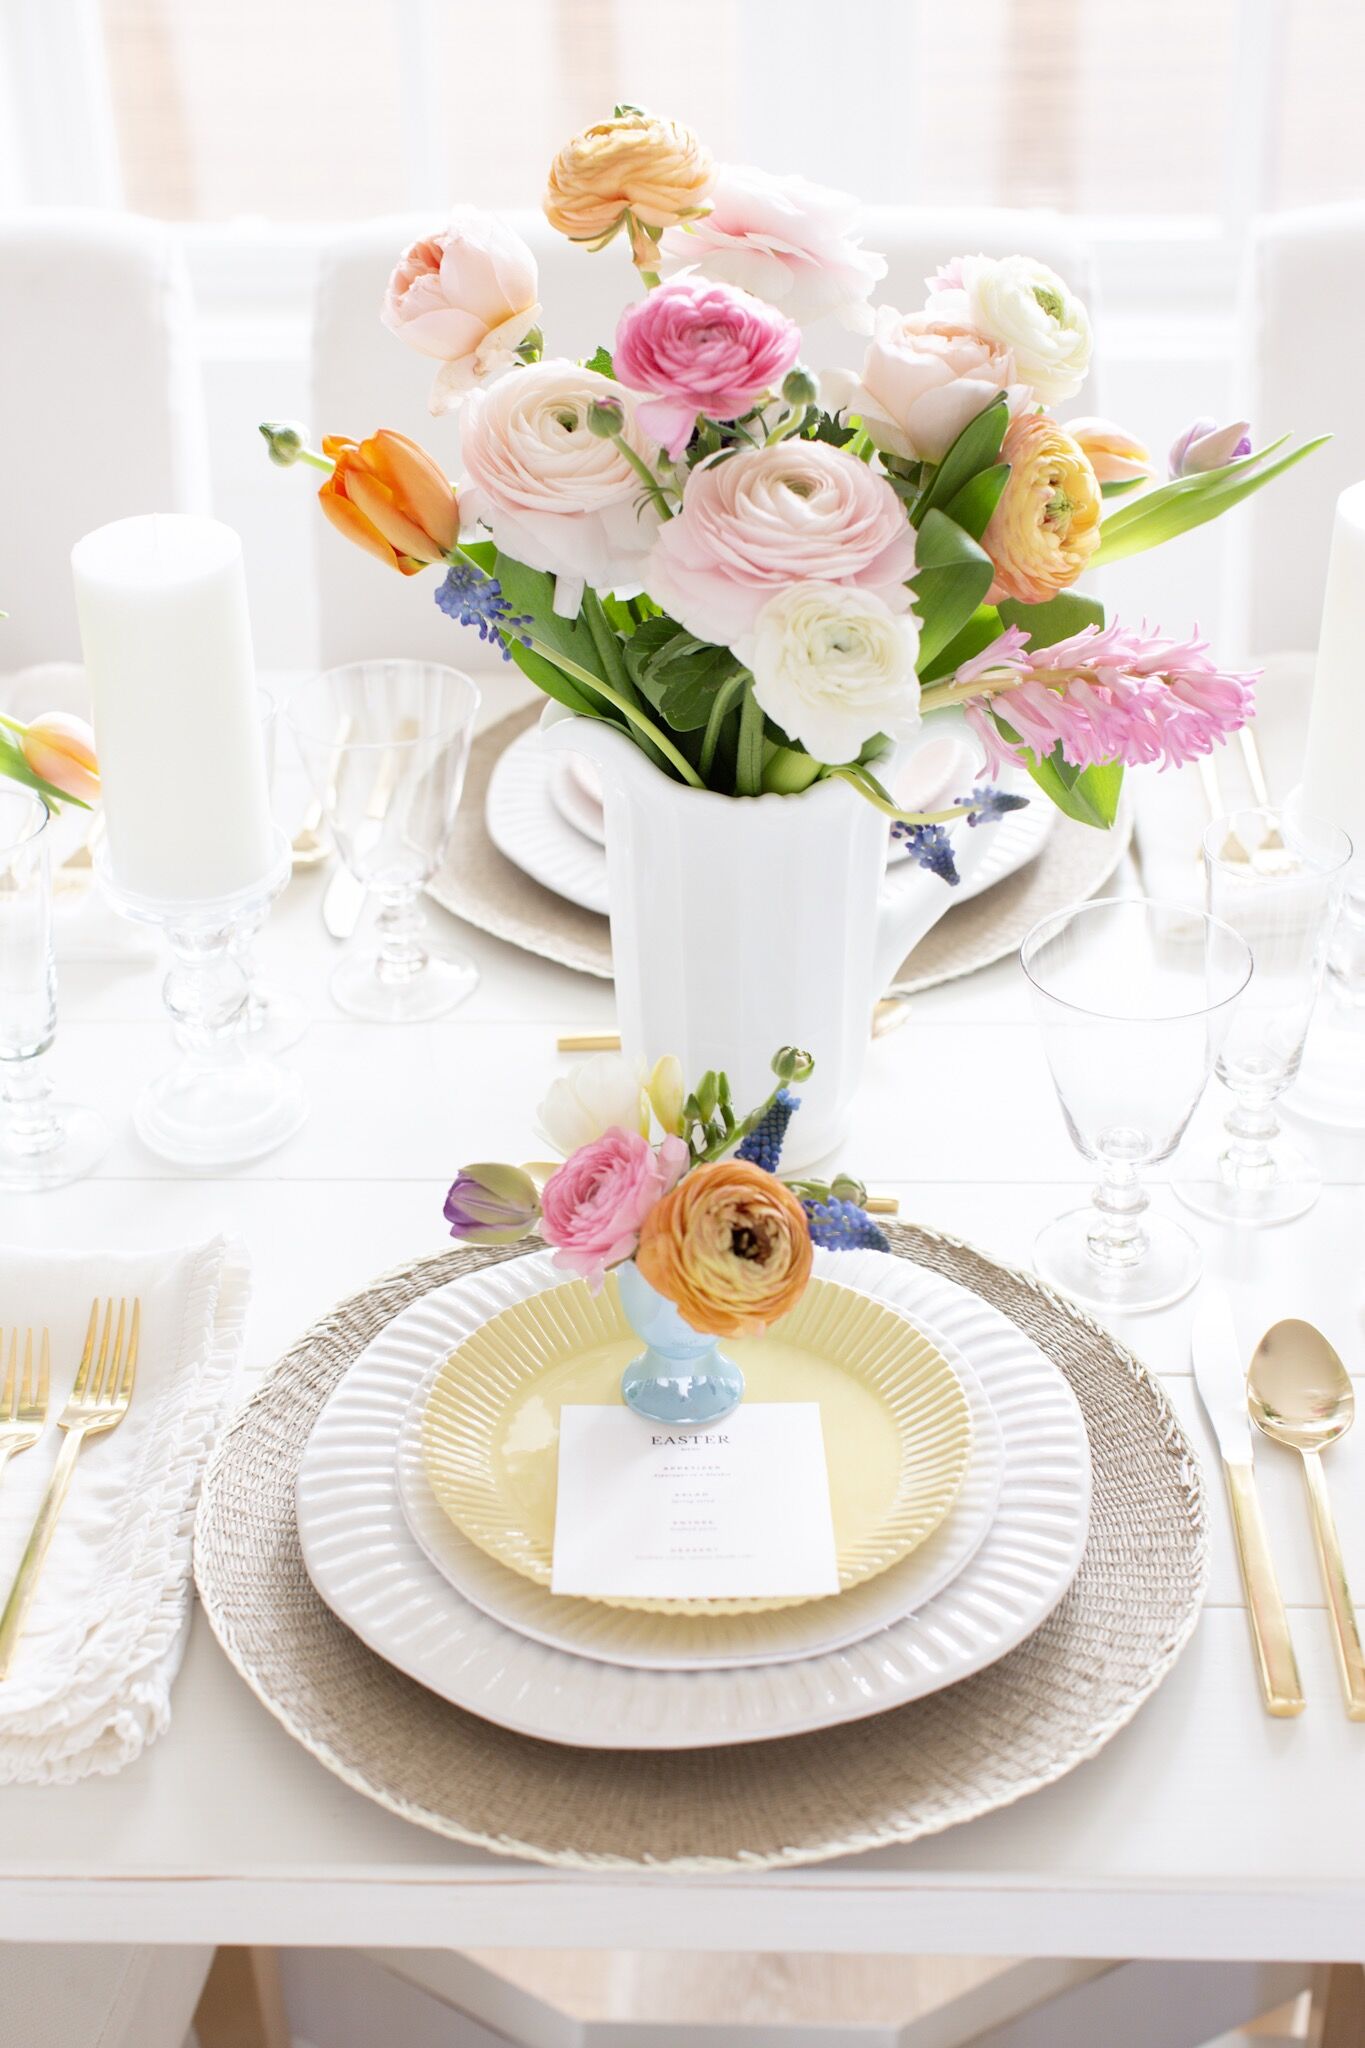 Easter Fraiche Table Dinner with pastel florals, white dinner ware and gold flatware: your complete guide to planning your perfect Easter Dinner!